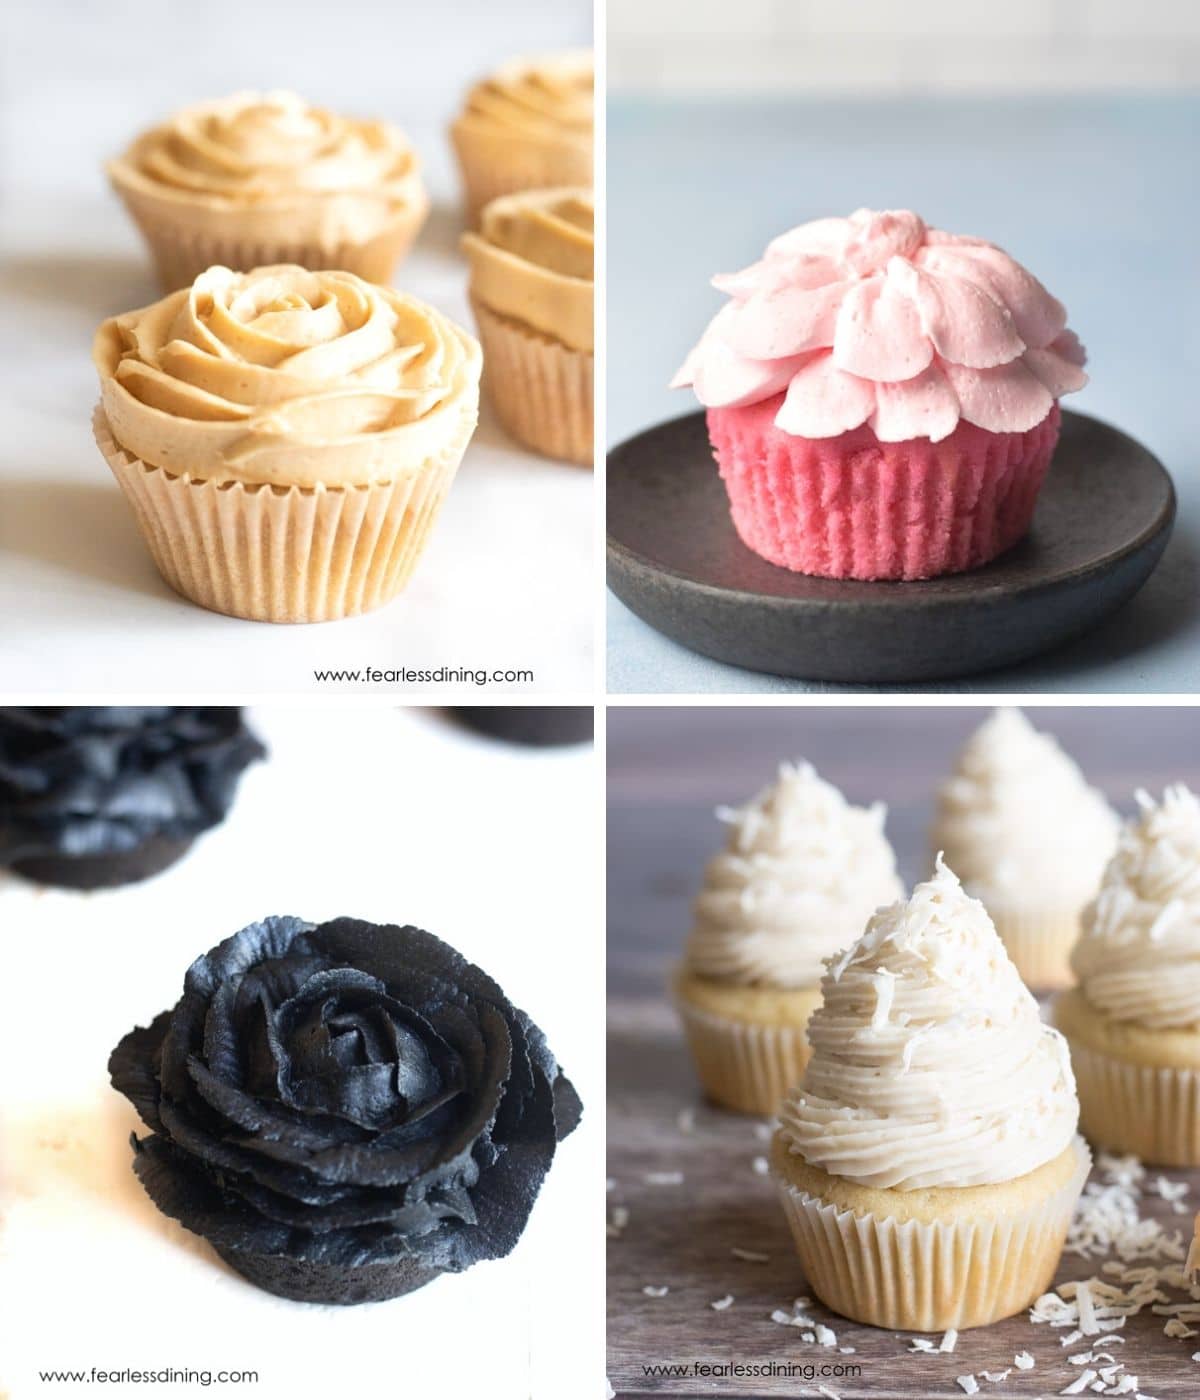 Photos of four cupcakes all frosted differently.